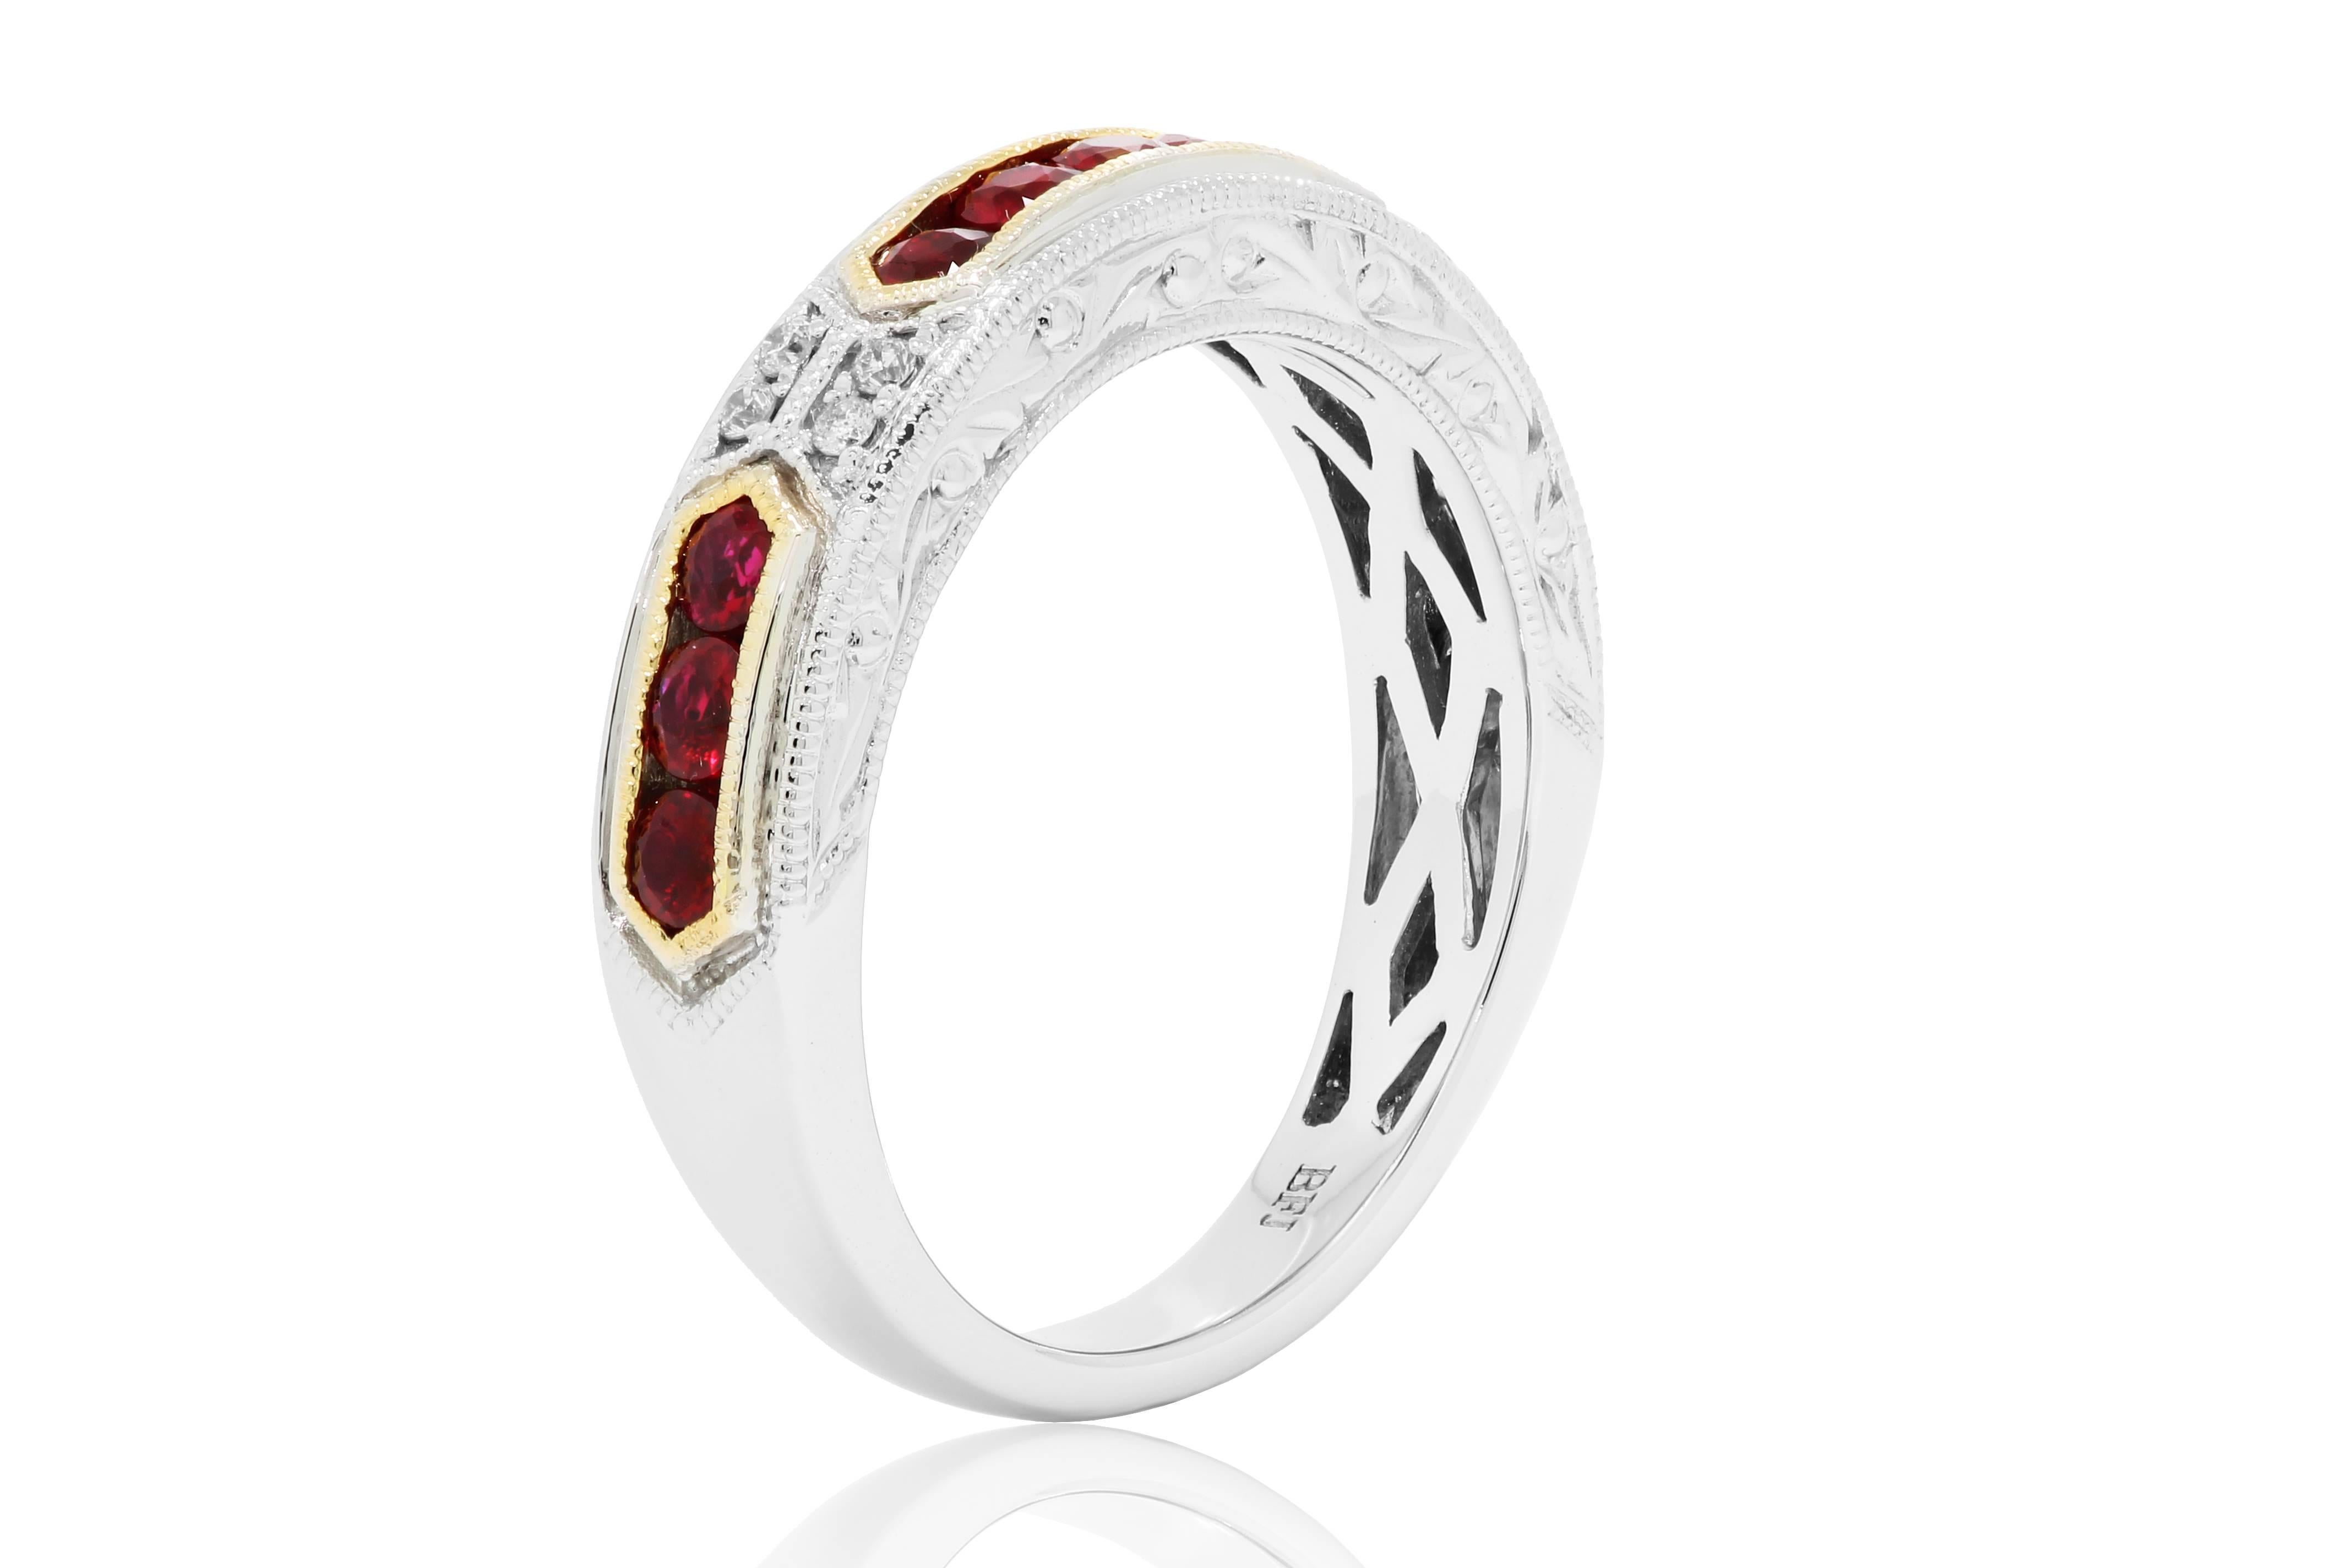 11 Ruby Round 0.80 carat , White Diamond G-H color VS-SI clarity Round 0.05 Carat in a beautiful engraving and filigree work 14K White and Yellow Gold Fashion Bridal band ring.